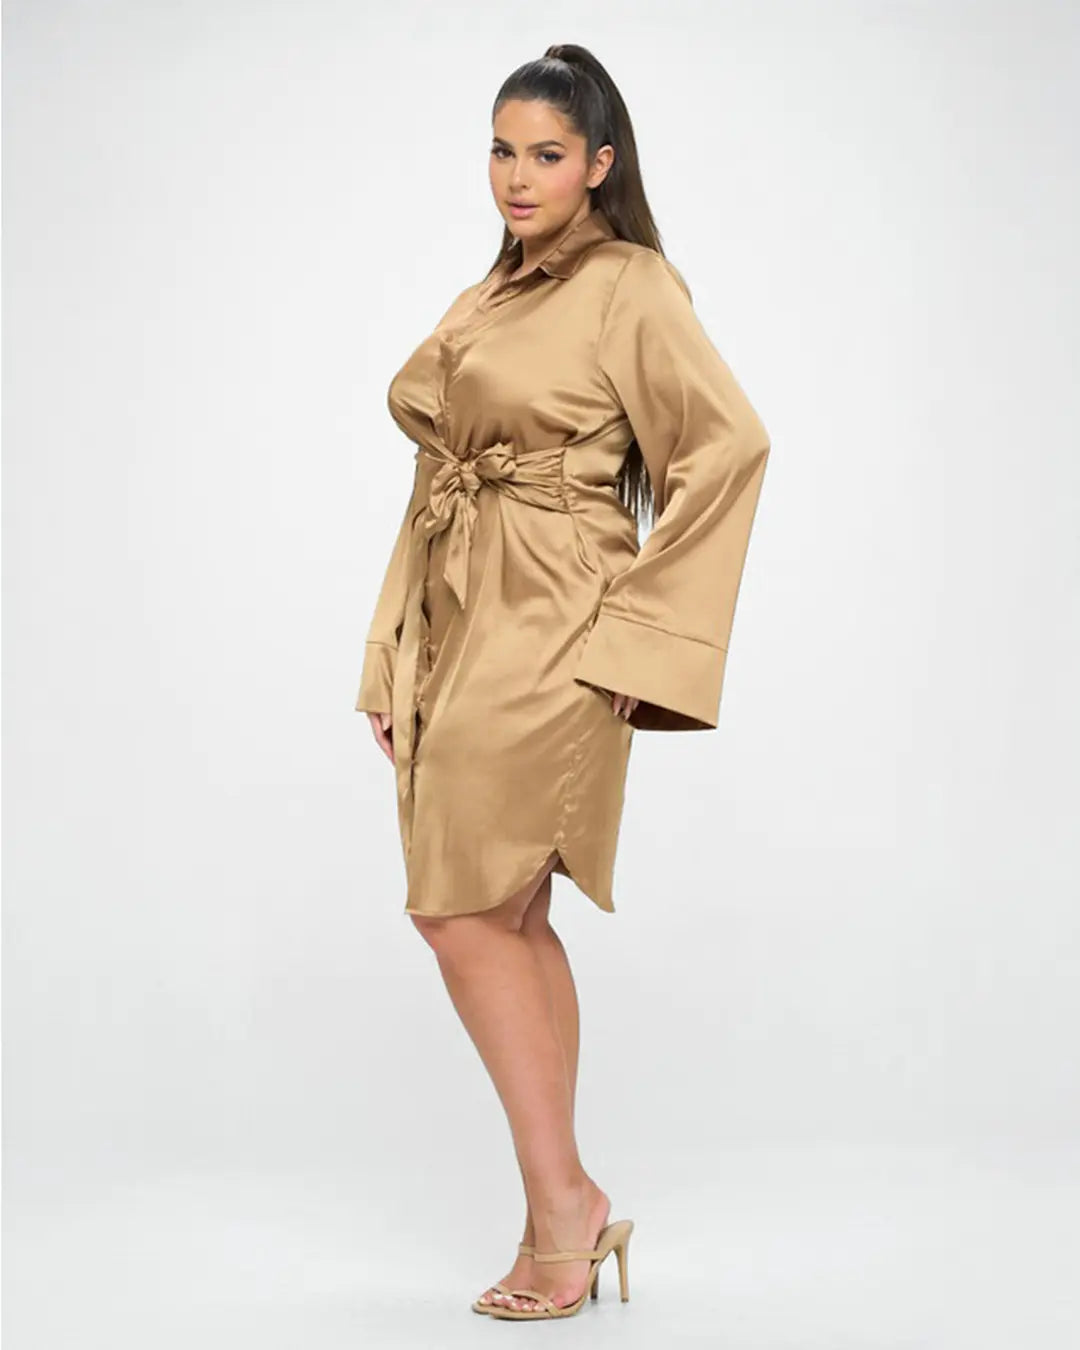 Elevate your evening look with our luxurious Gold Satin Dress, featuring exquisite button-down detailing for added elegance. Crafted for both style and comfort for any special occasion.